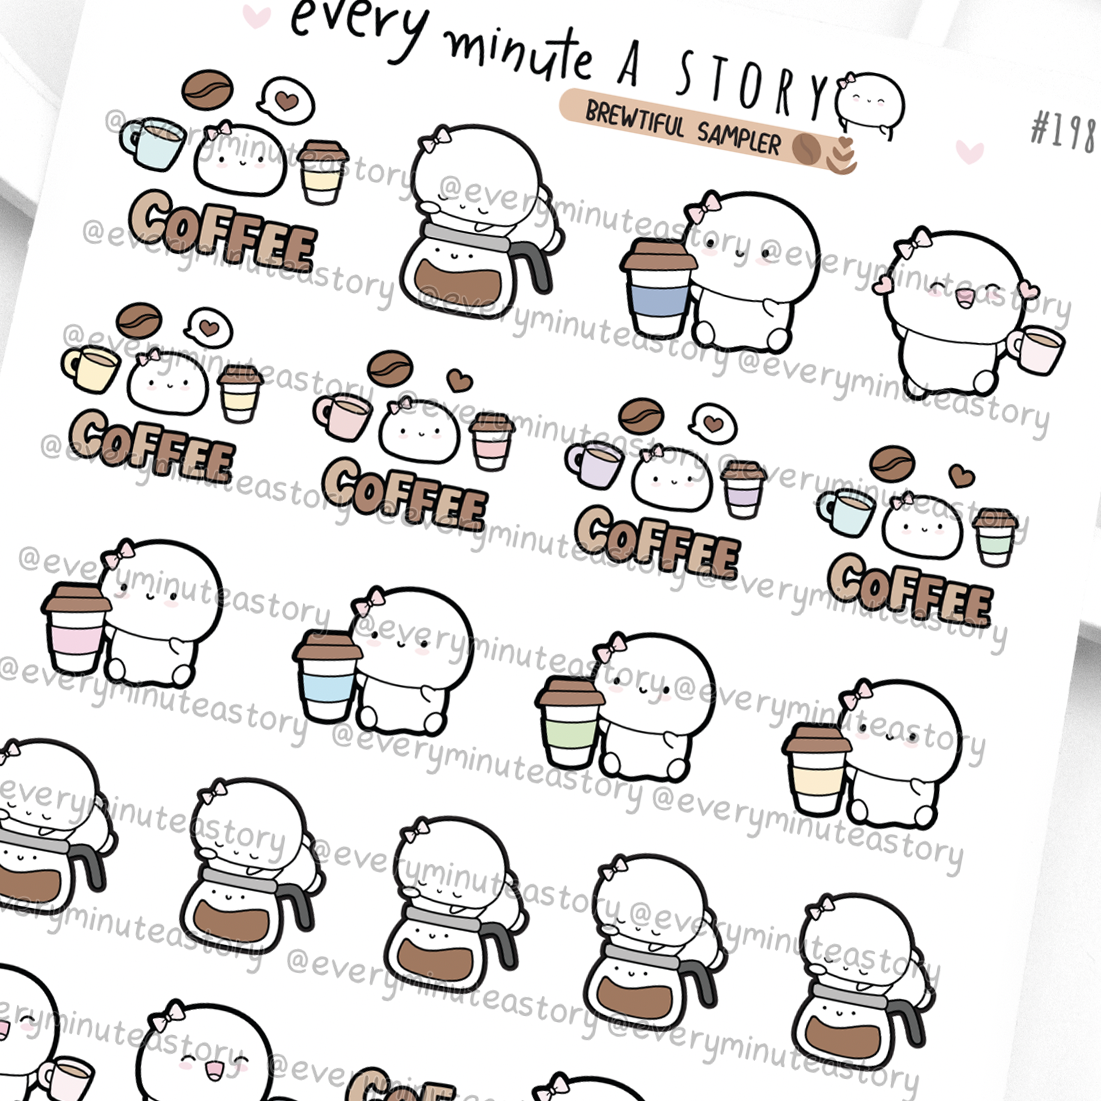 Fueled by coffee, coffee lover's stickers